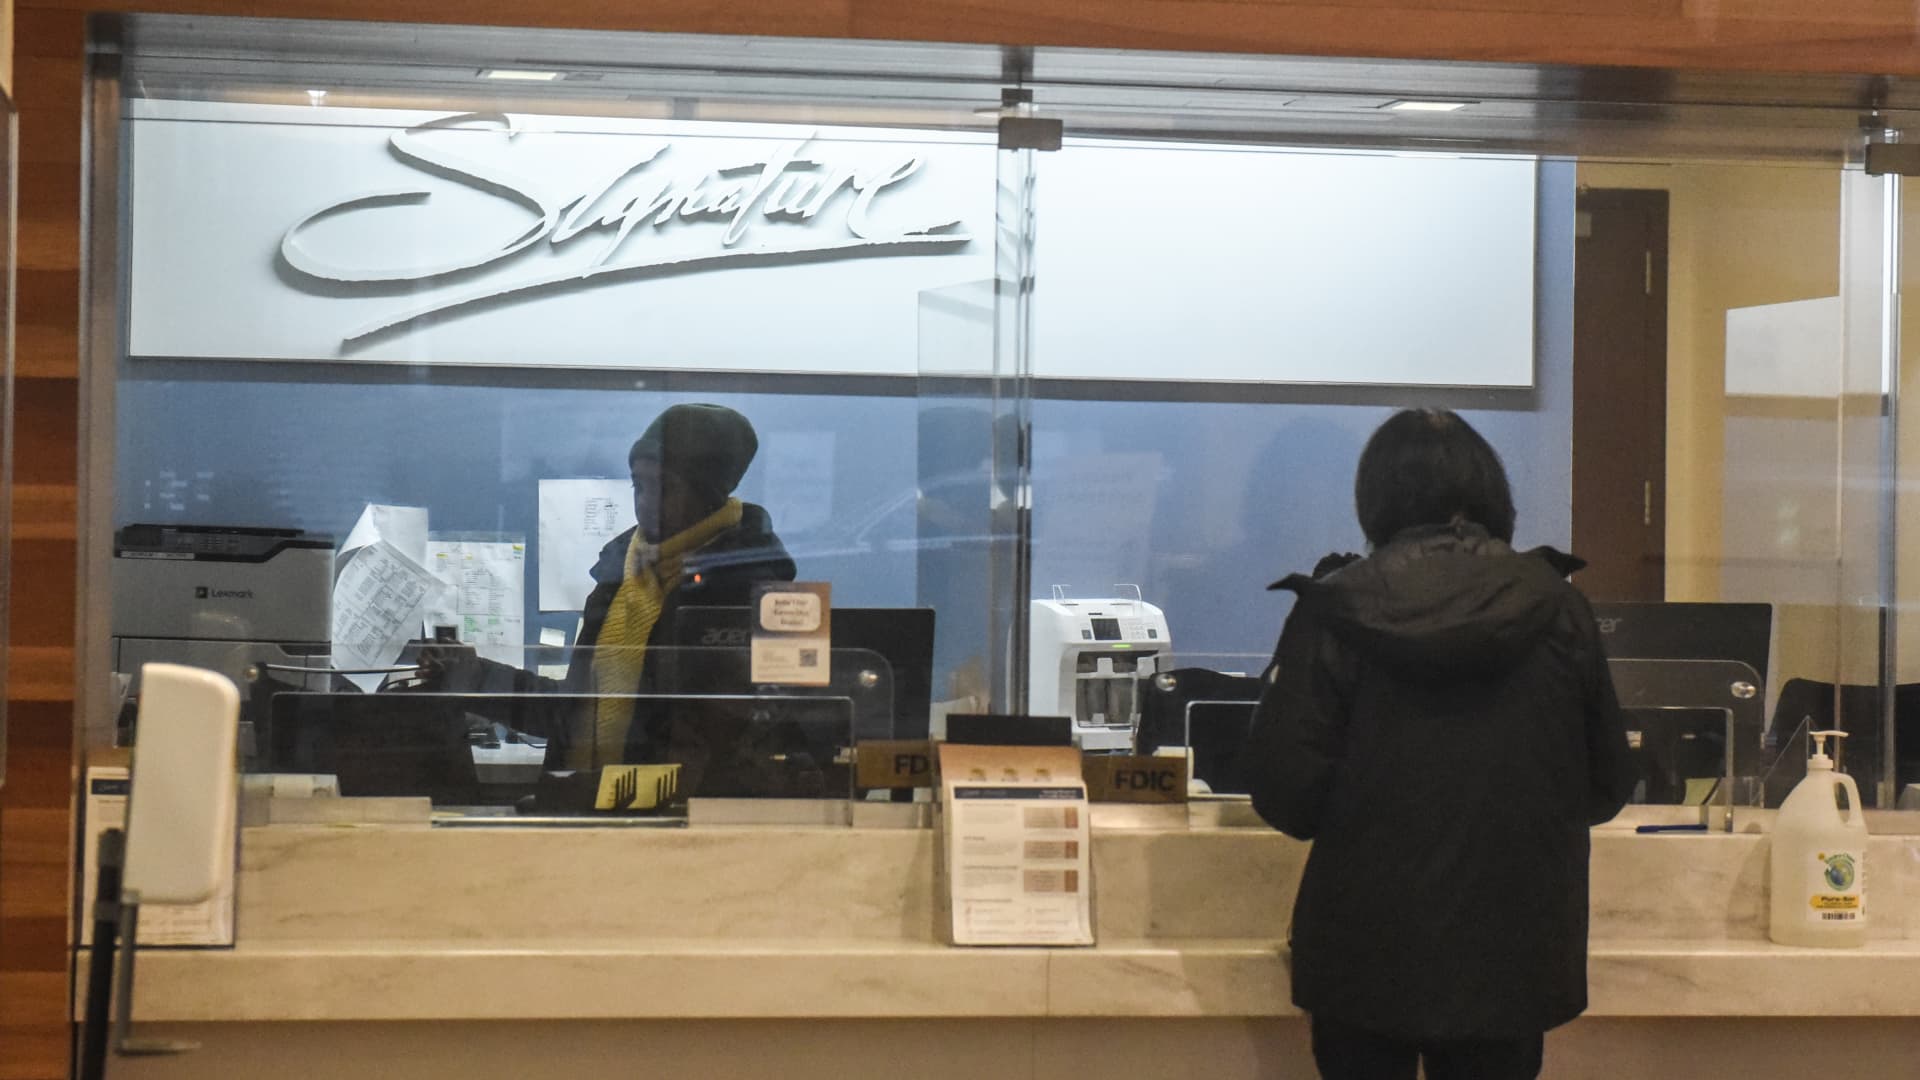 A worker assists a customer at a Signature Bank branch in New York, US, on Monday, March 13, 2023.